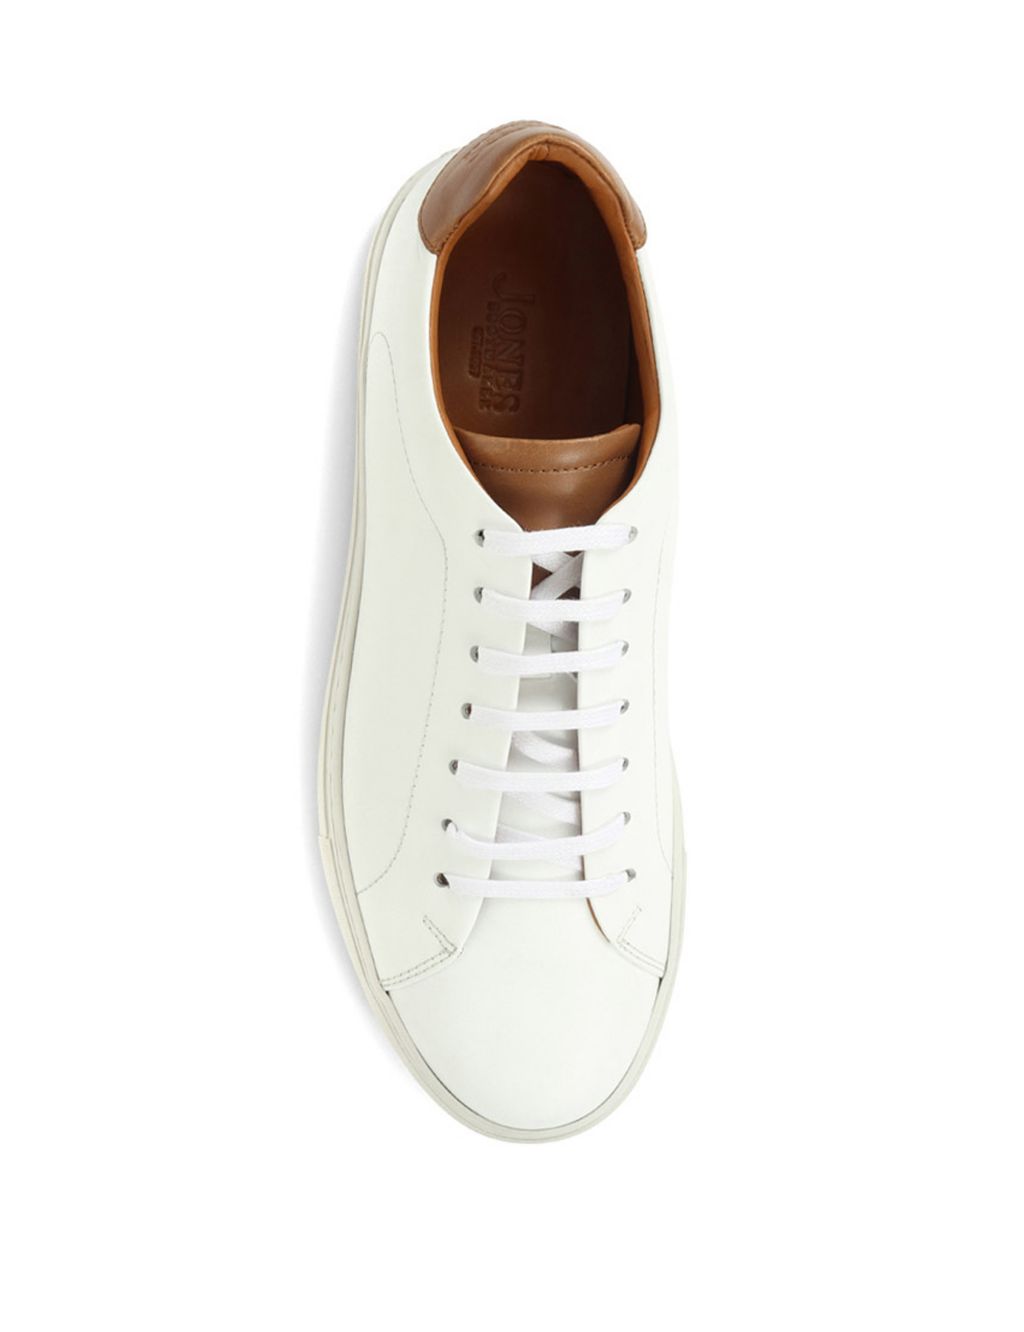 Leather Lace Up Trainers image 6